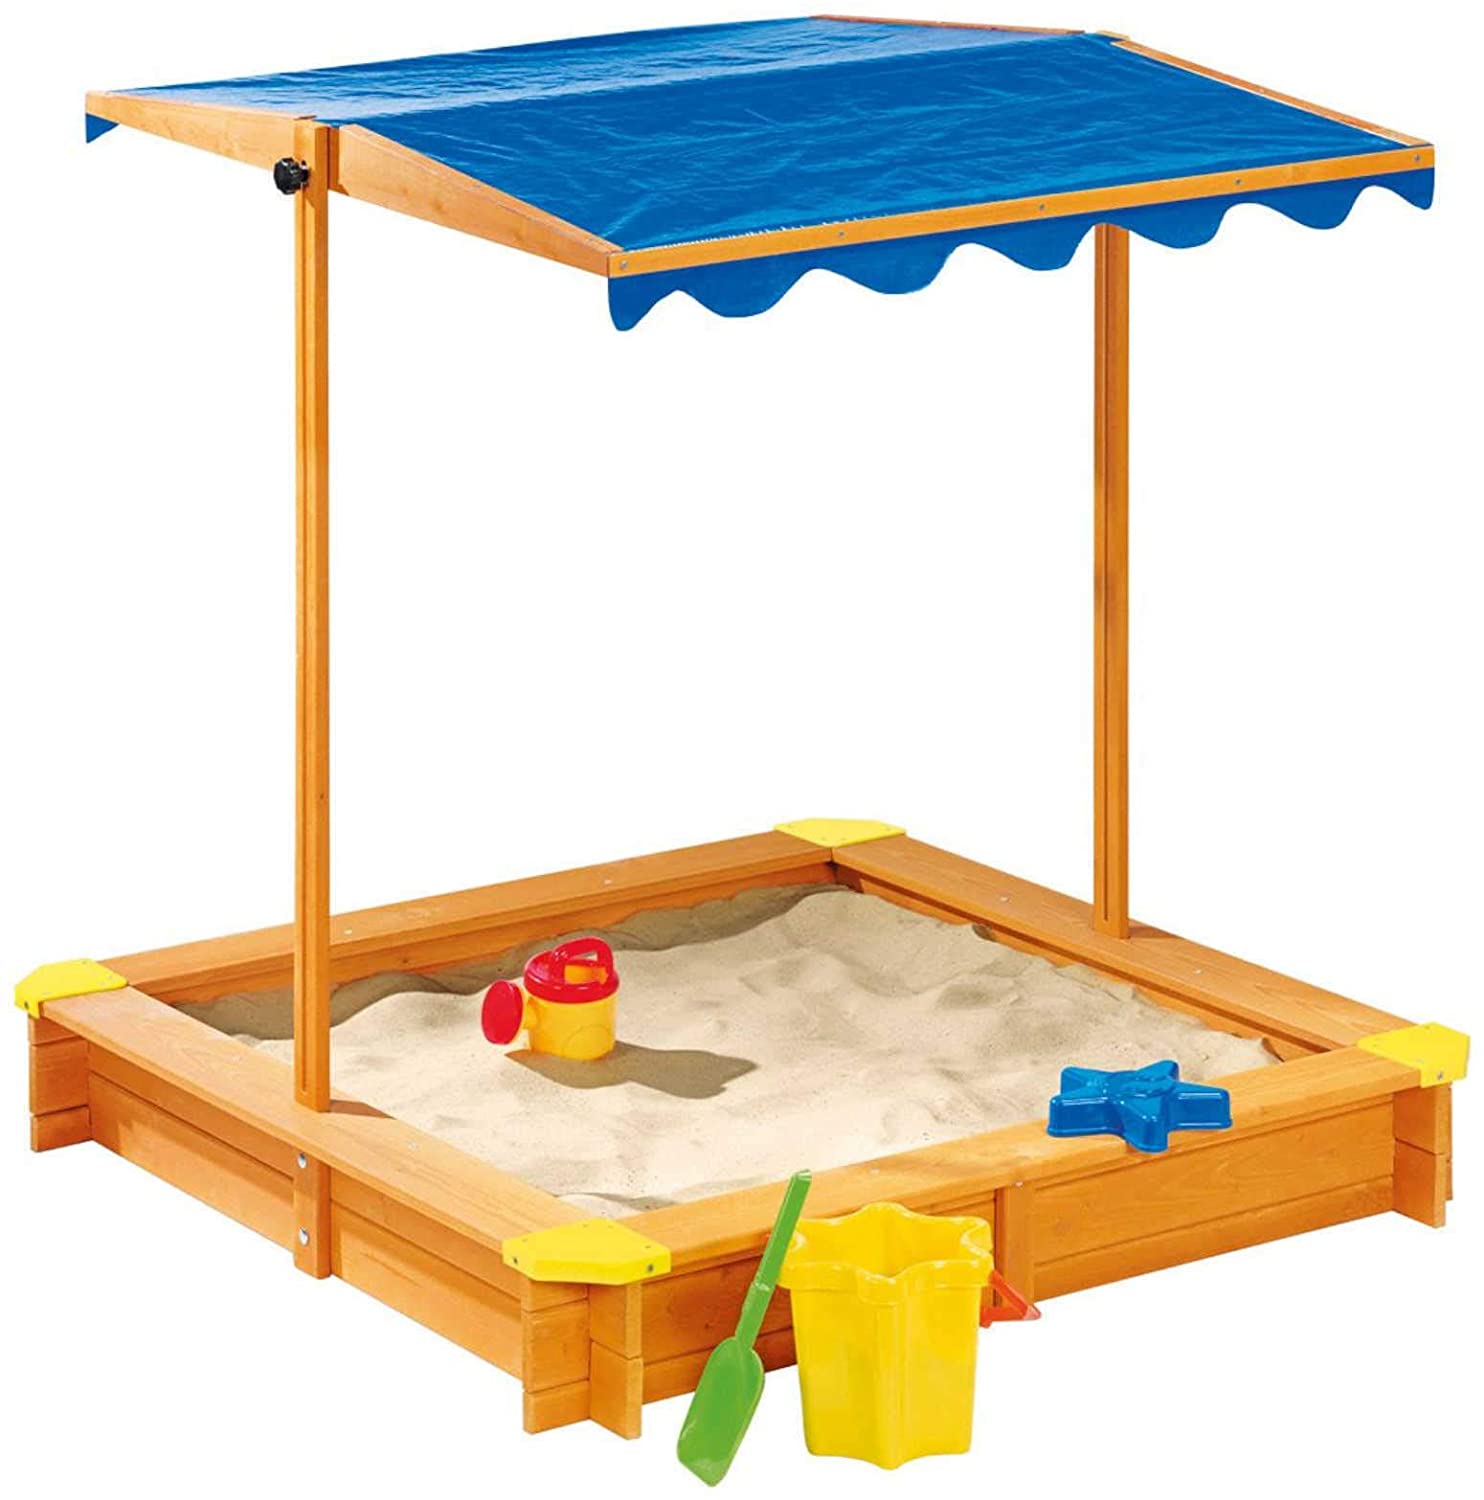 Sandpit with cover